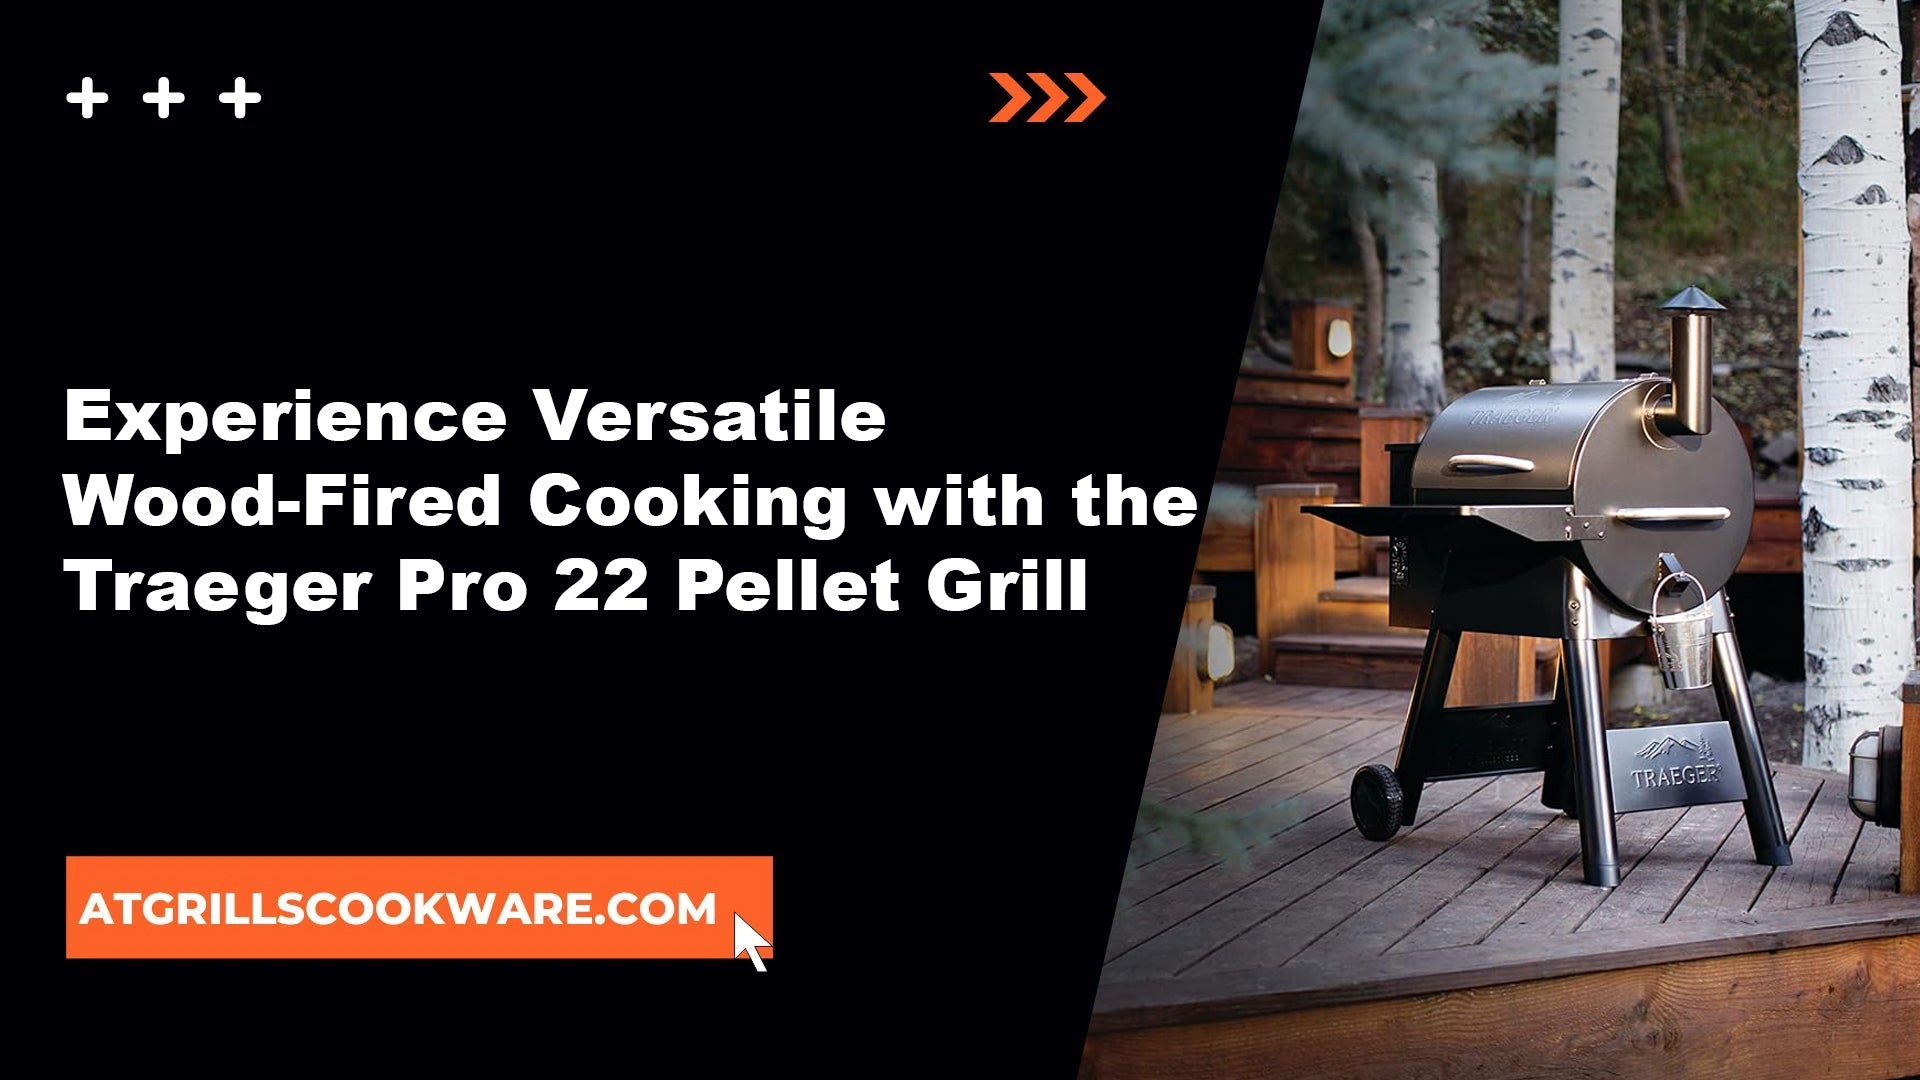 Experience Versatile Wood-Fired Cooking with the Traeger Pro 22 Pellet Grill